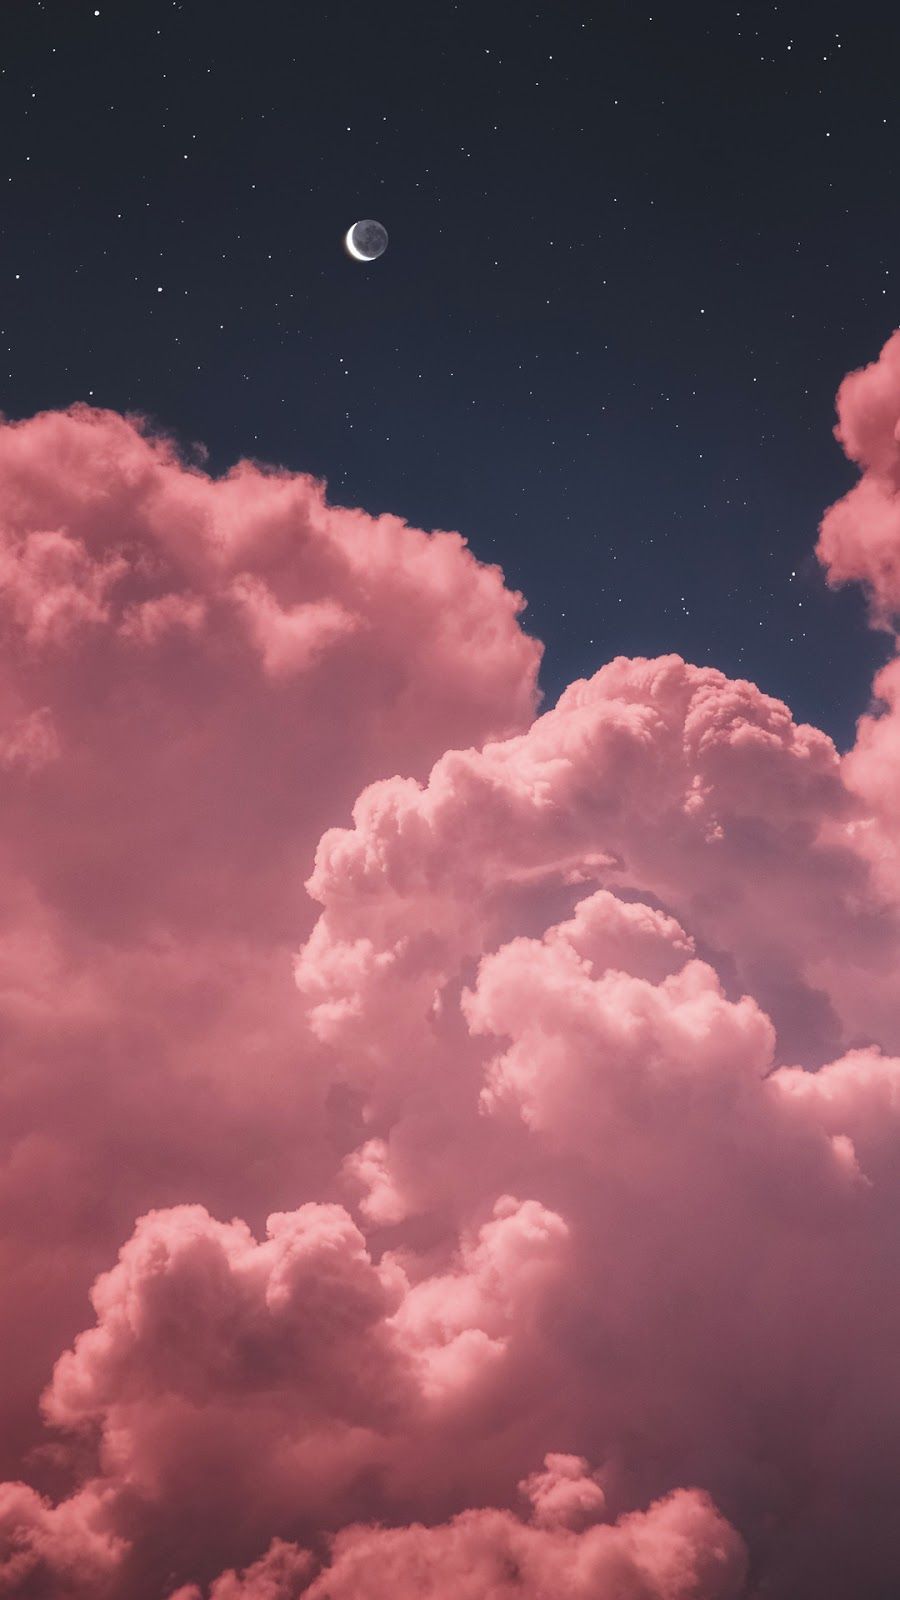 Two moon in the night sky. iPhone wallpaper stars, Night sky wallpaper, Pink clouds wallpaper